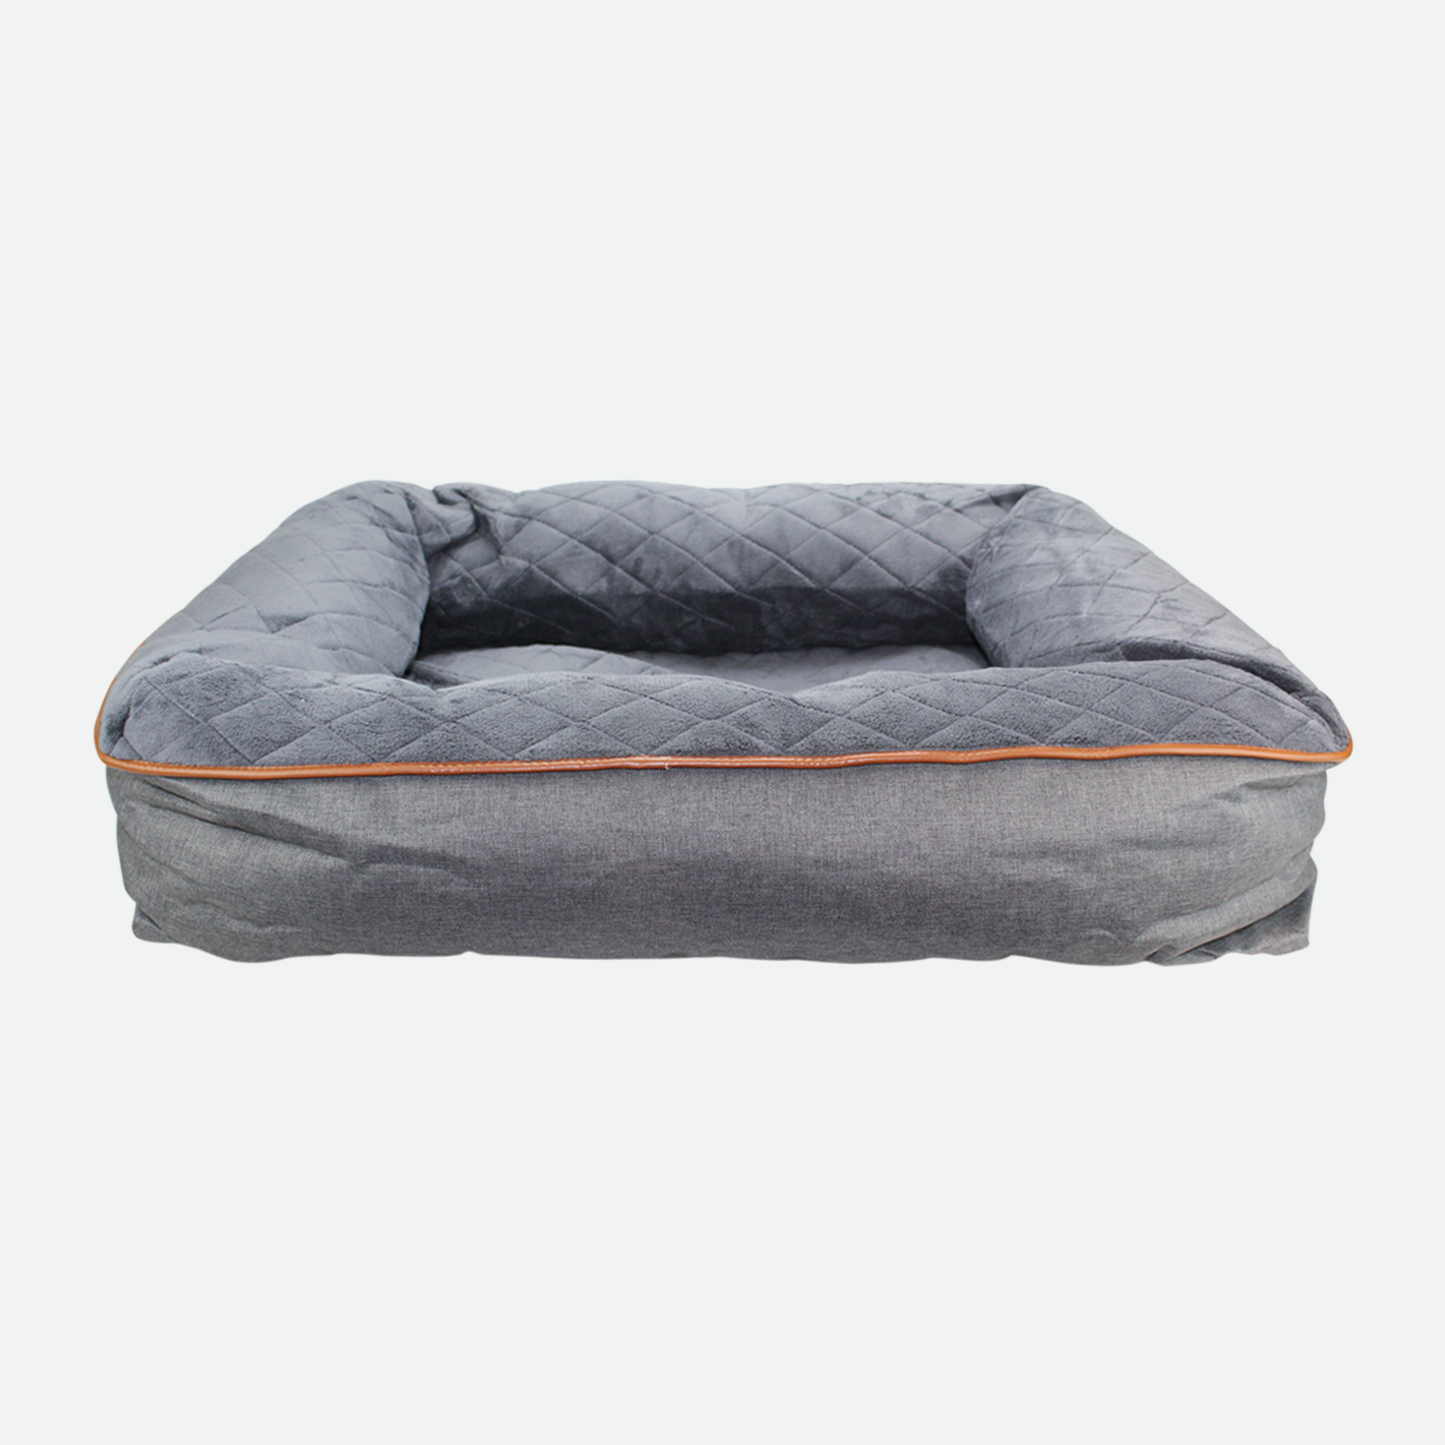 Comfy bed for dog, dark gray